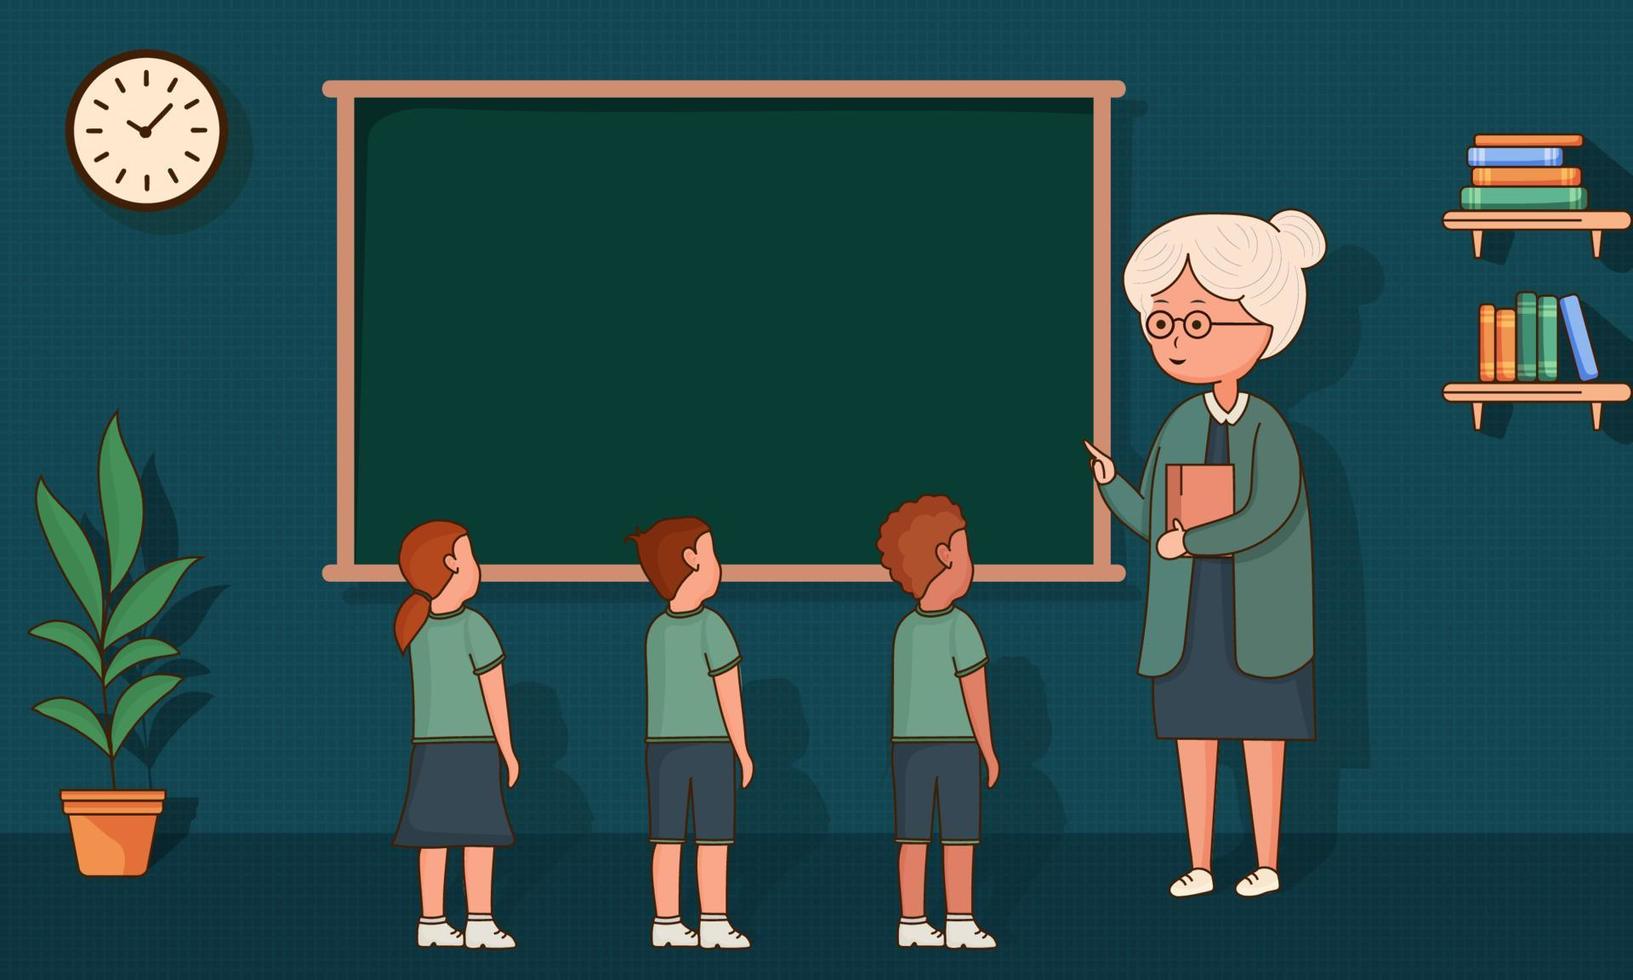 Female Teacher Character Giving Instructions To Her Students In Front of Empty Green Board In Classroom Interior View. vector